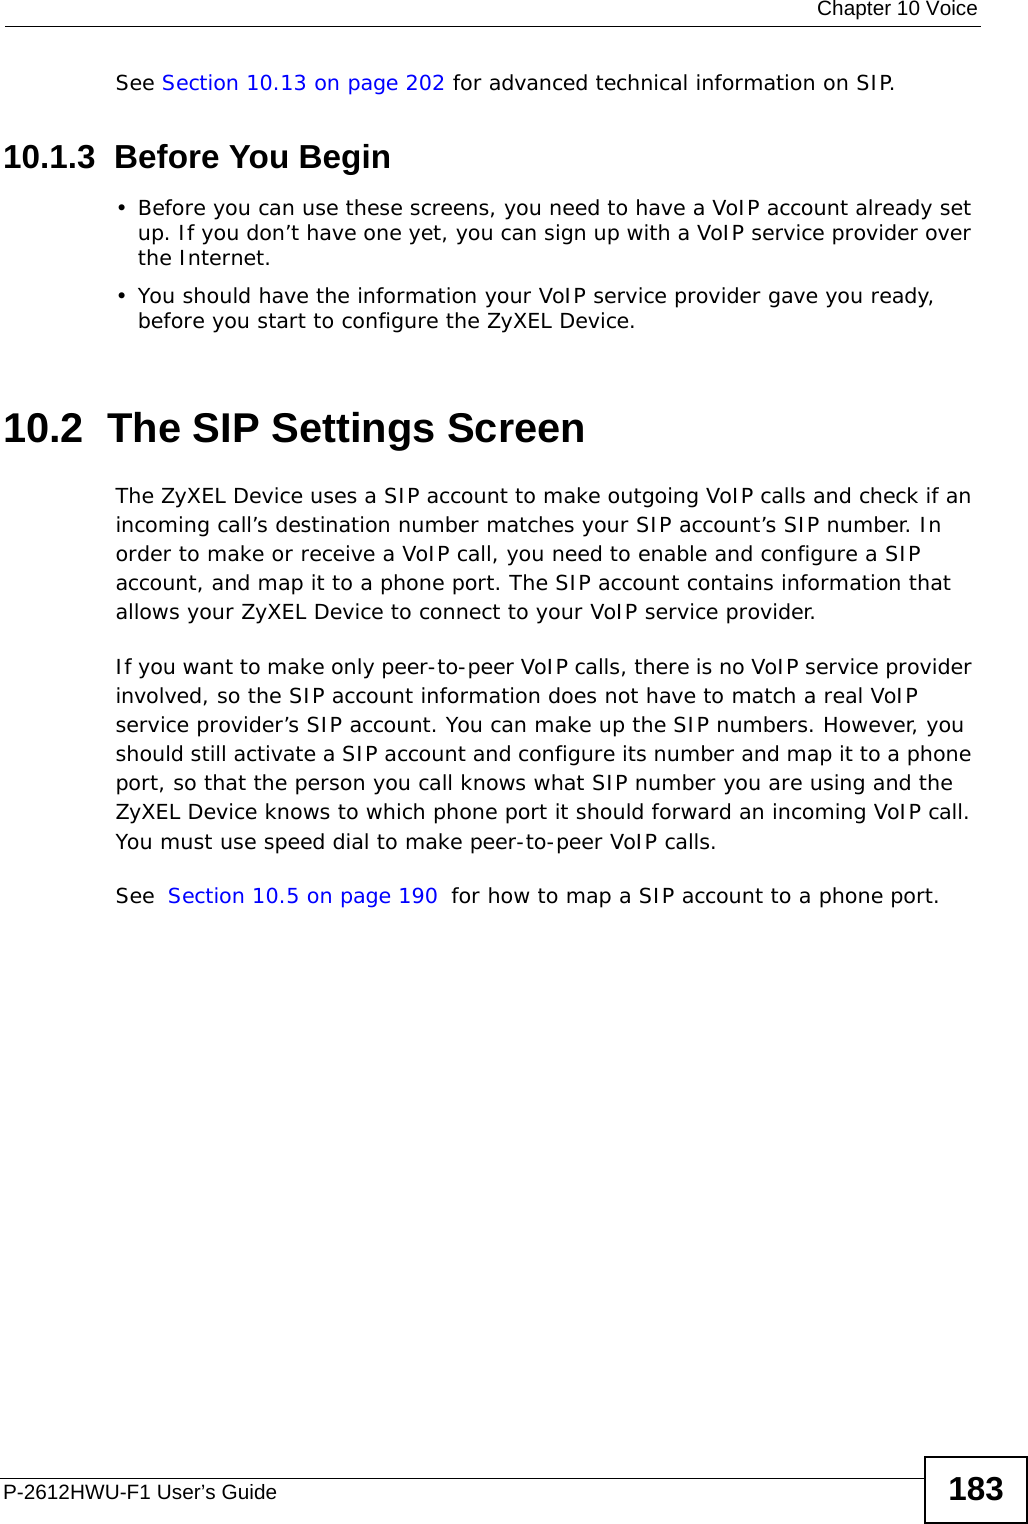  Chapter 10 VoiceP-2612HWU-F1 User’s Guide 183See Section 10.13 on page 202 for advanced technical information on SIP.10.1.3  Before You Begin• Before you can use these screens, you need to have a VoIP account already set up. If you don’t have one yet, you can sign up with a VoIP service provider over the Internet. • You should have the information your VoIP service provider gave you ready, before you start to configure the ZyXEL Device.10.2  The SIP Settings Screen The ZyXEL Device uses a SIP account to make outgoing VoIP calls and check if an incoming call’s destination number matches your SIP account’s SIP number. In order to make or receive a VoIP call, you need to enable and configure a SIP account, and map it to a phone port. The SIP account contains information that allows your ZyXEL Device to connect to your VoIP service provider. If you want to make only peer-to-peer VoIP calls, there is no VoIP service provider involved, so the SIP account information does not have to match a real VoIP service provider’s SIP account. You can make up the SIP numbers. However, you should still activate a SIP account and configure its number and map it to a phone port, so that the person you call knows what SIP number you are using and the ZyXEL Device knows to which phone port it should forward an incoming VoIP call. You must use speed dial to make peer-to-peer VoIP calls.See Section 10.5 on page 190 for how to map a SIP account to a phone port.